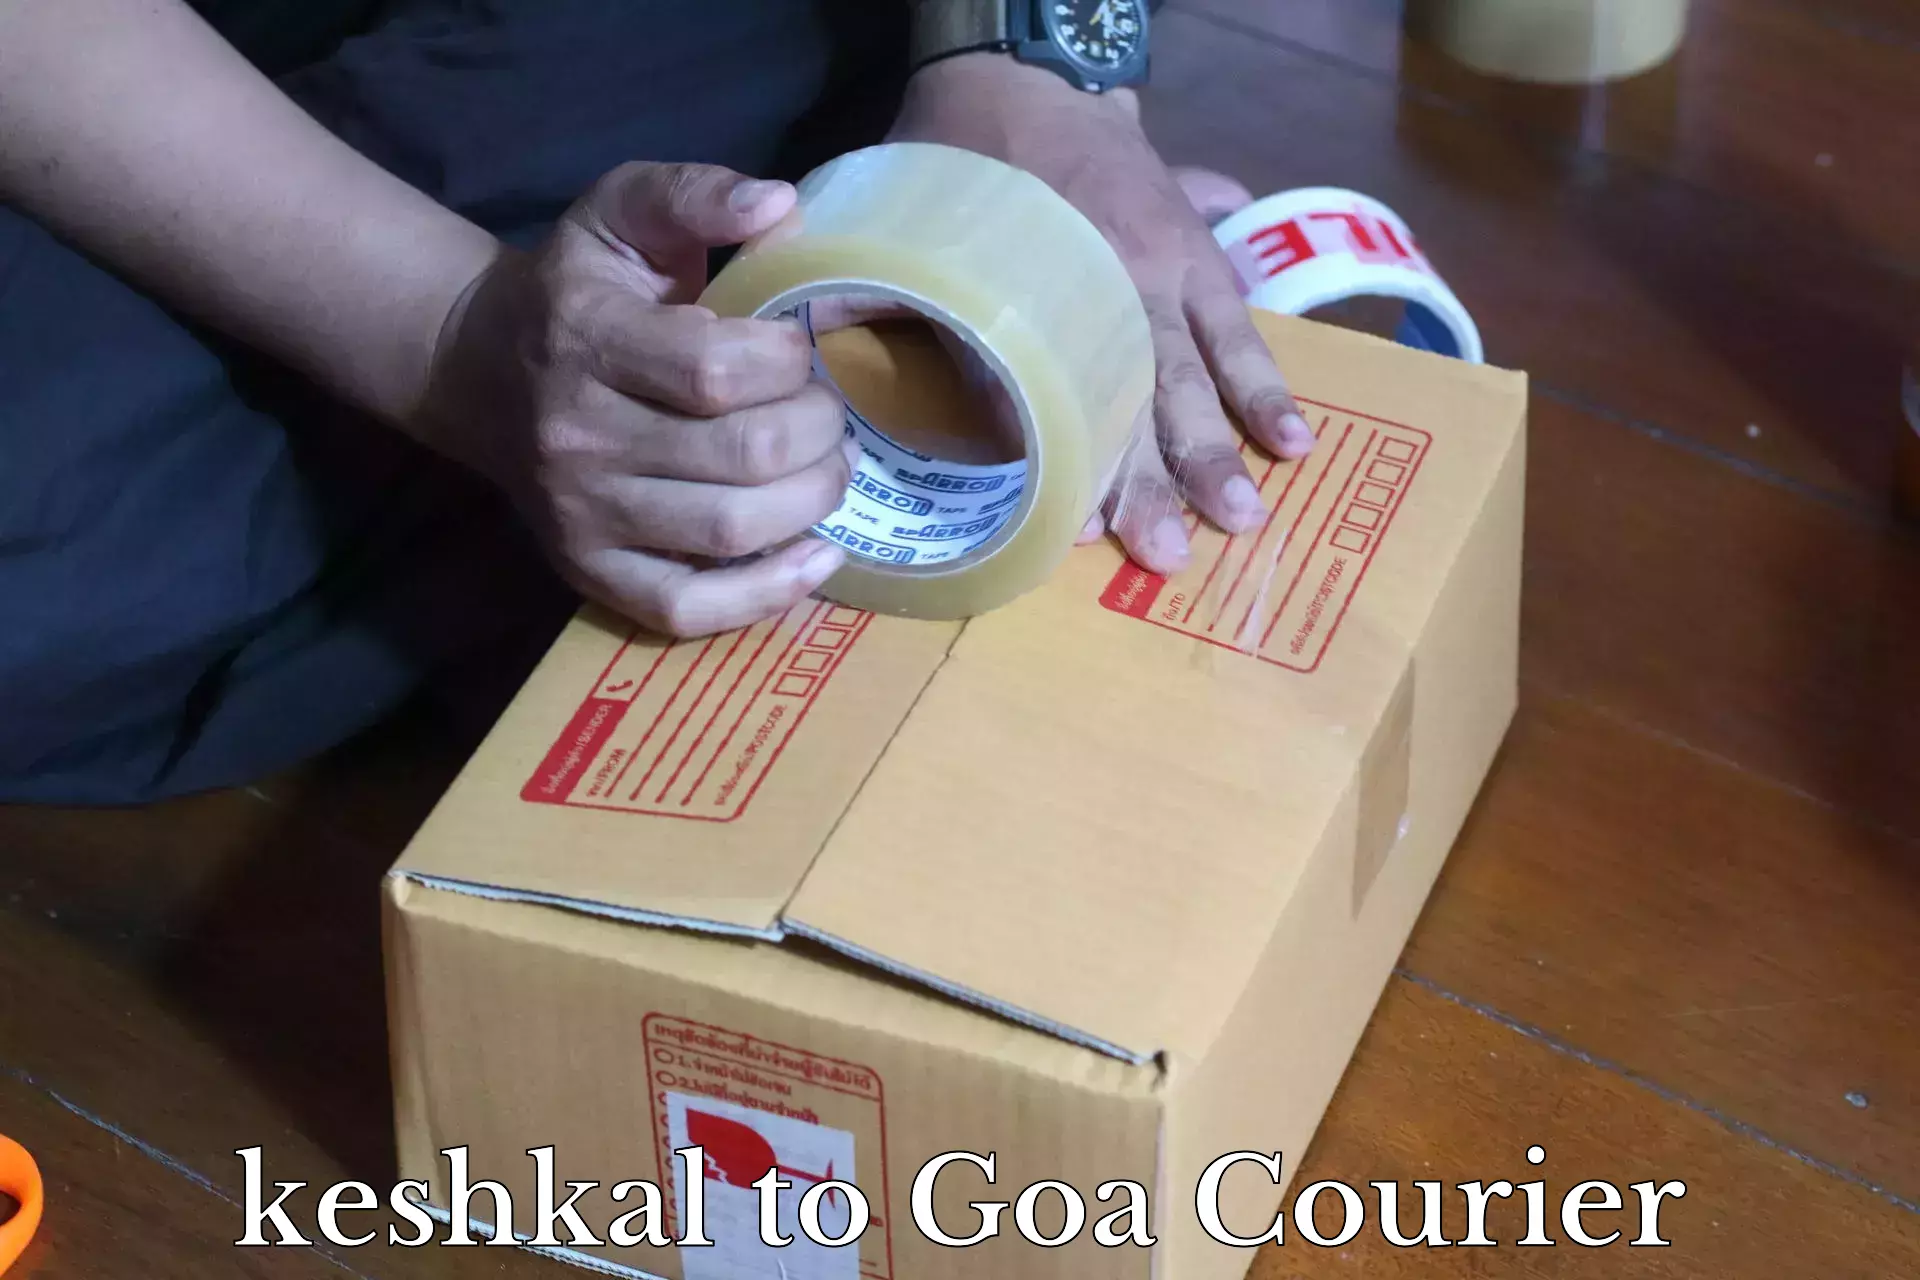 Secure freight services keshkal to Goa University